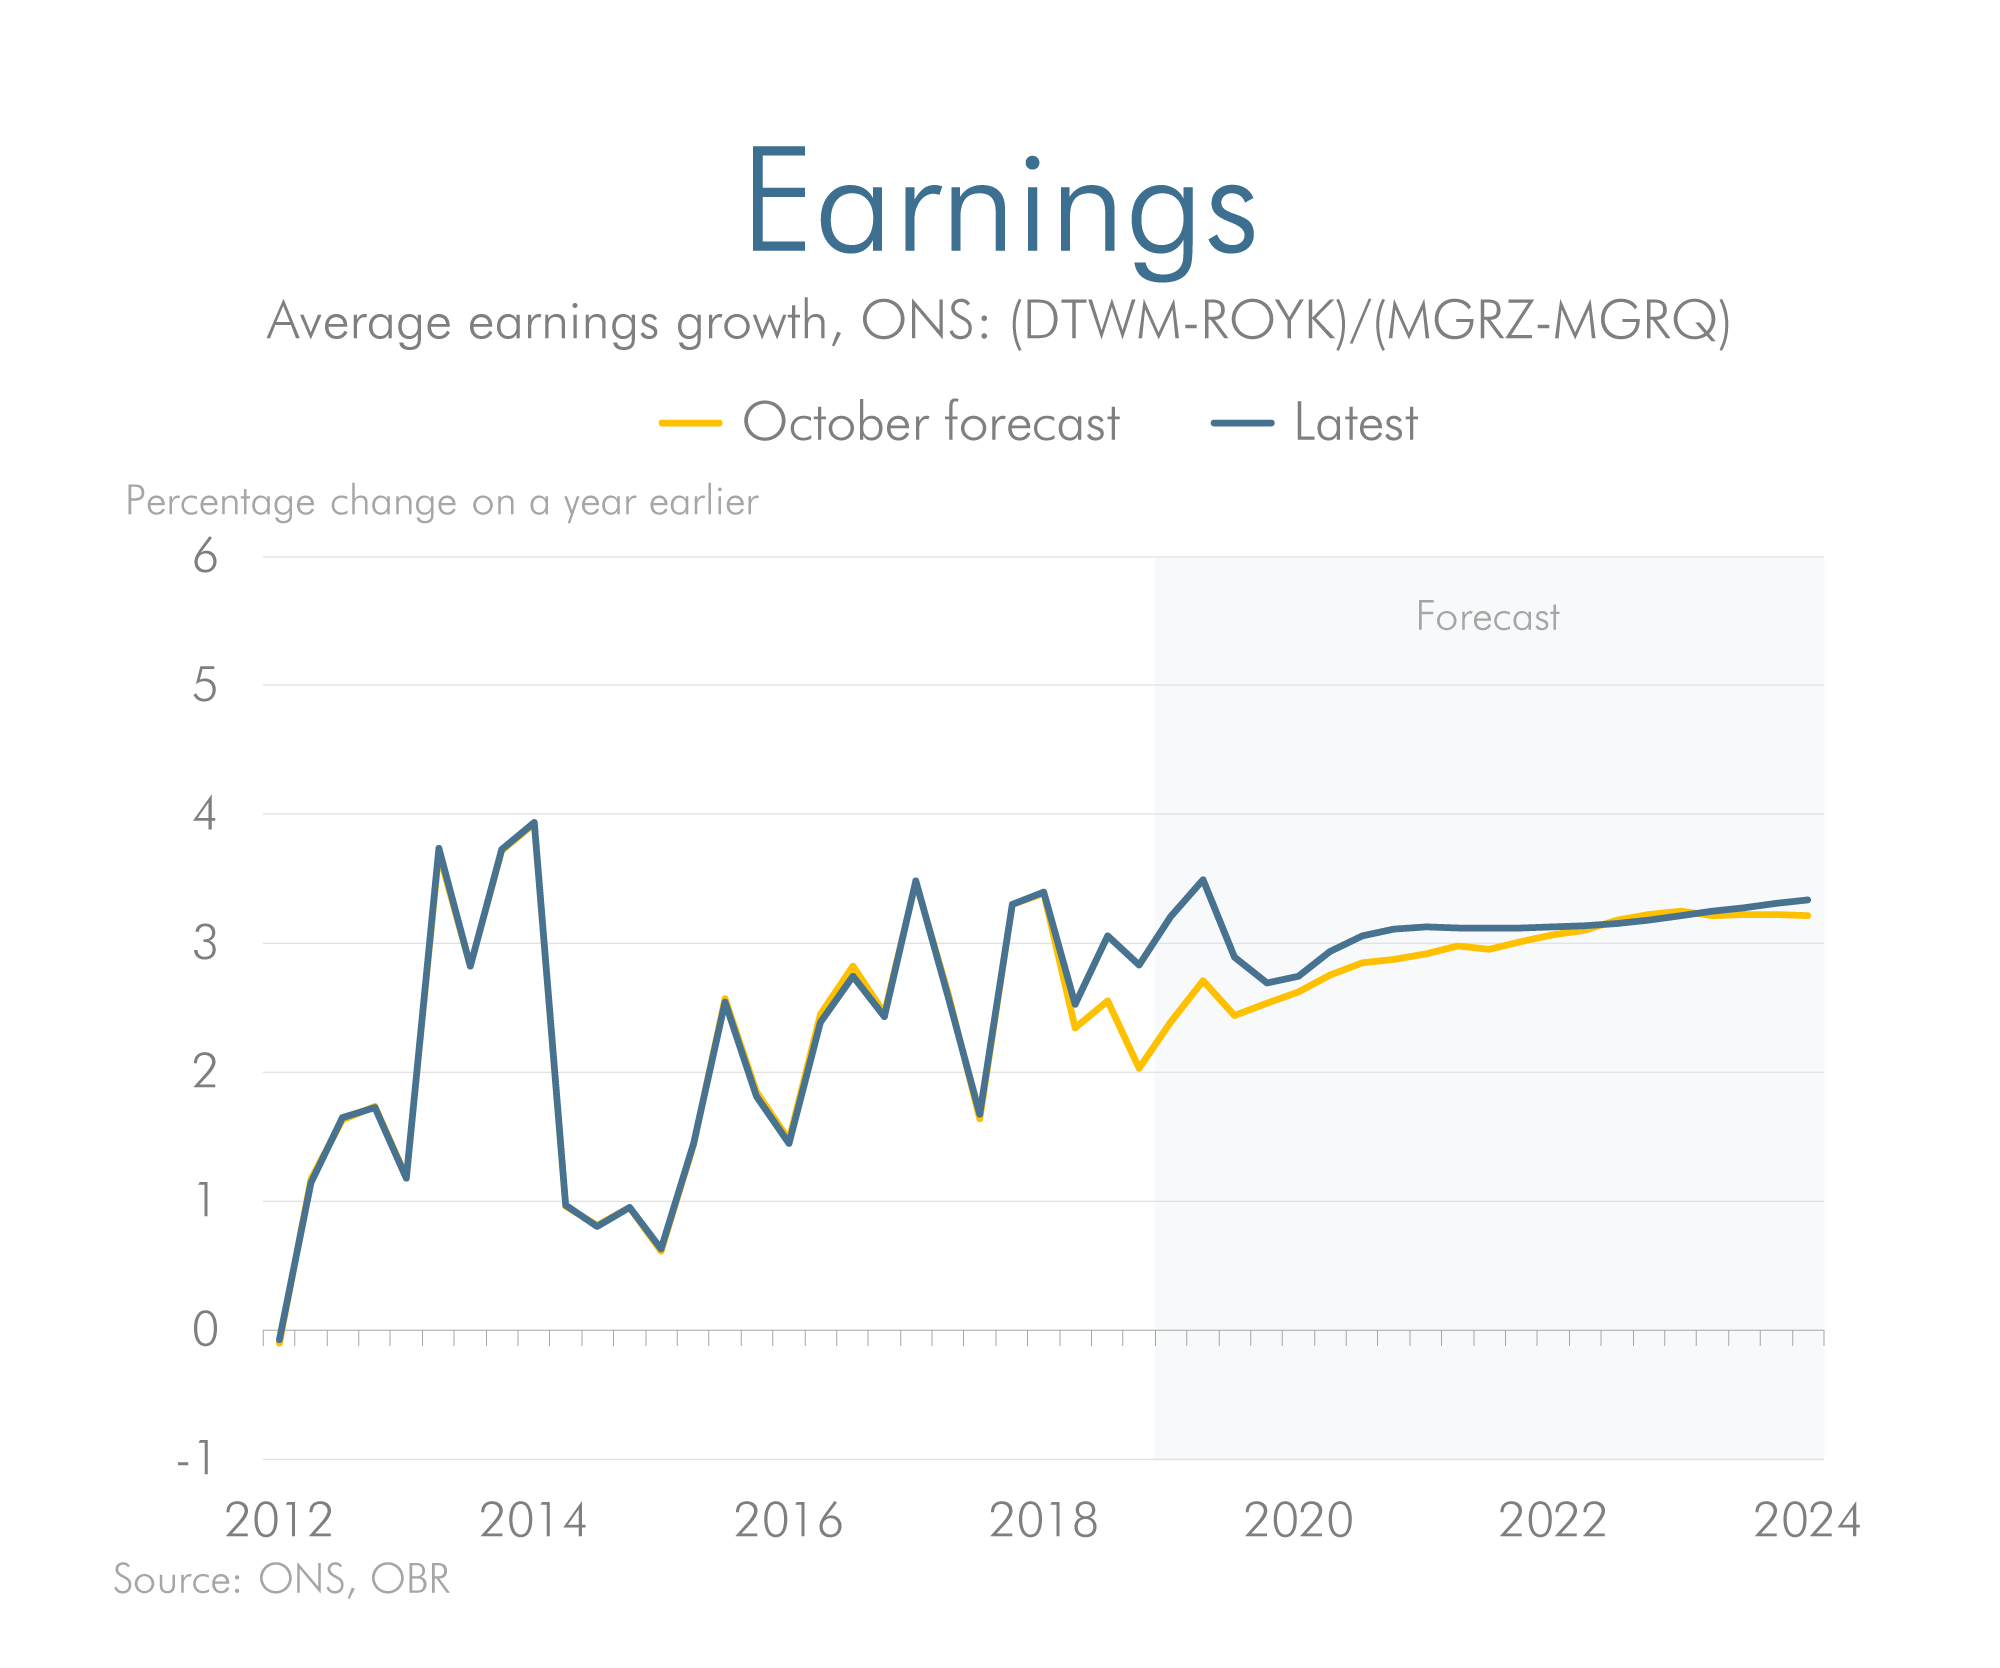 Latest forecast versus previous forecast for earnings